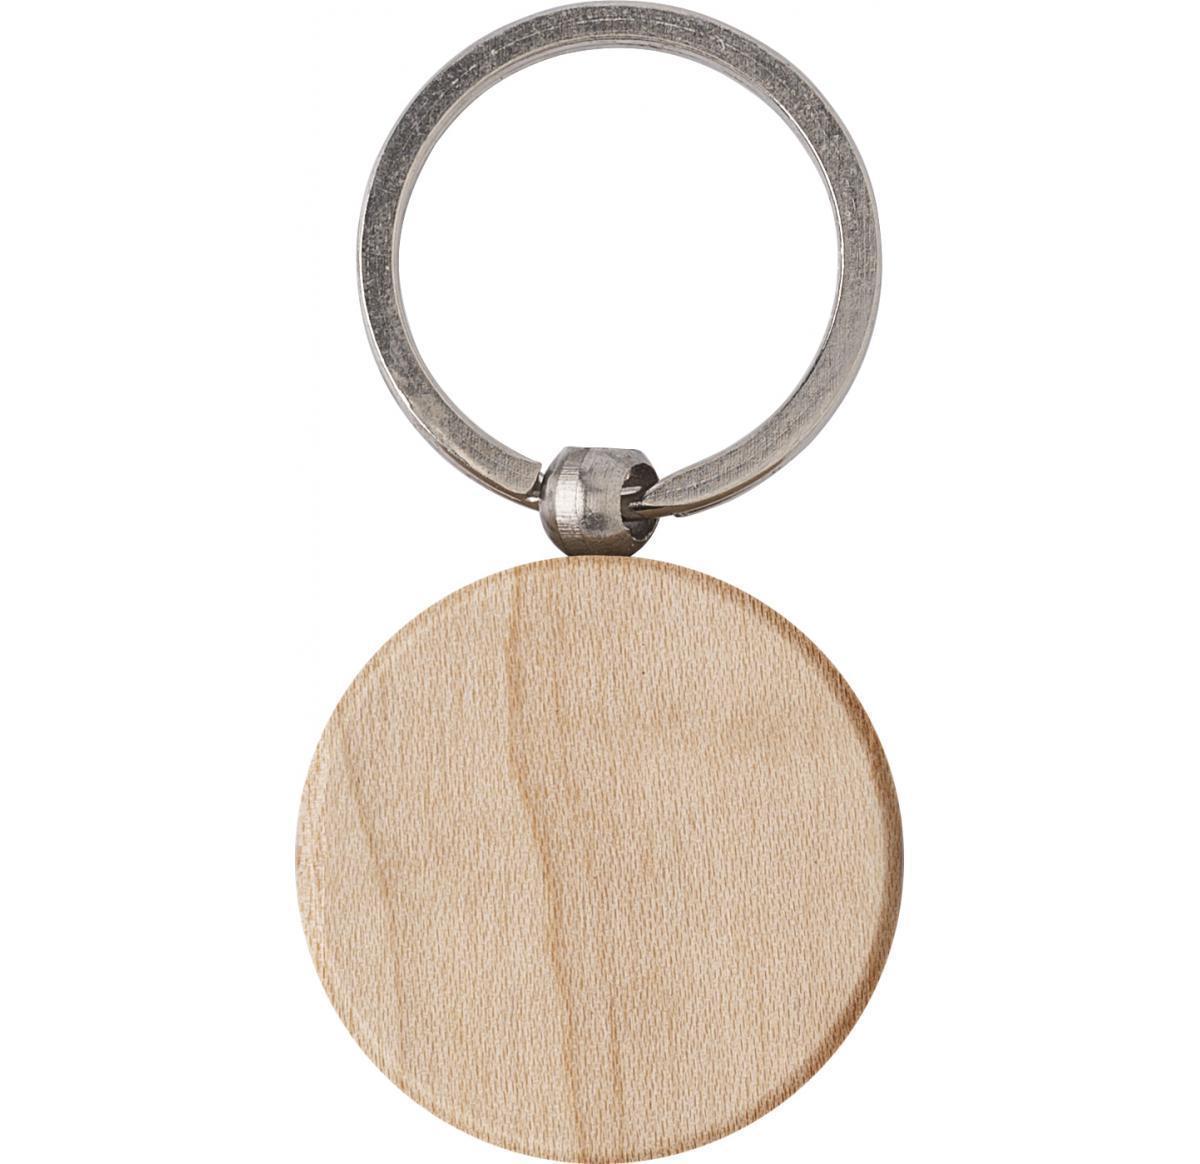 Round wooden key holder with metal ring